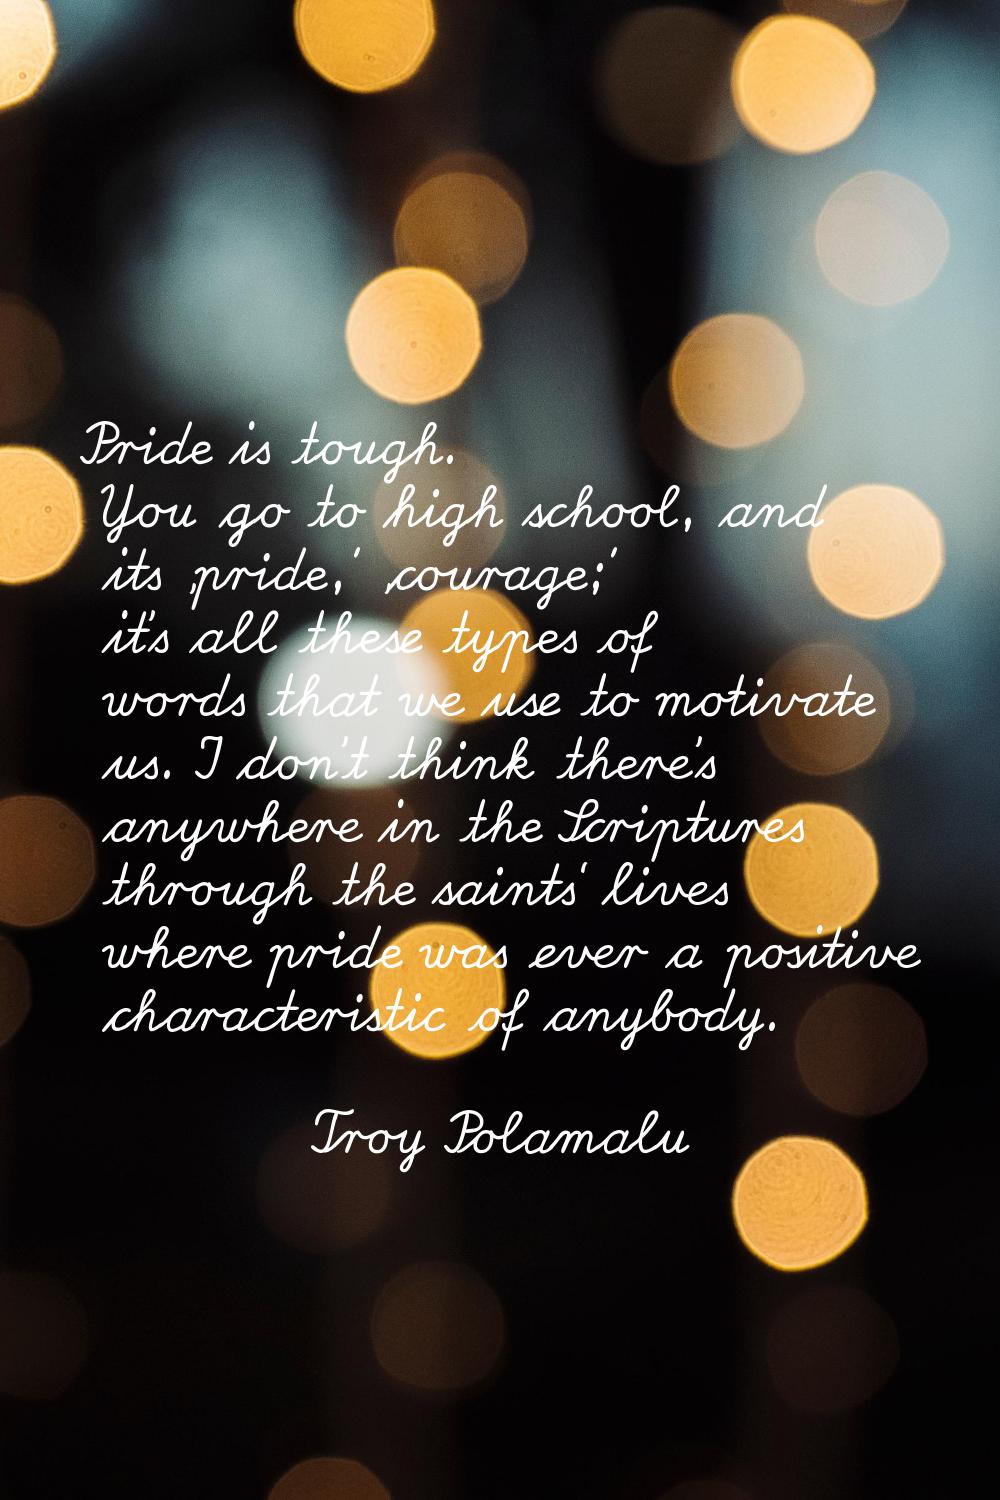 Pride is tough. You go to high school, and its 'pride,' 'courage;' it's all these types of words th